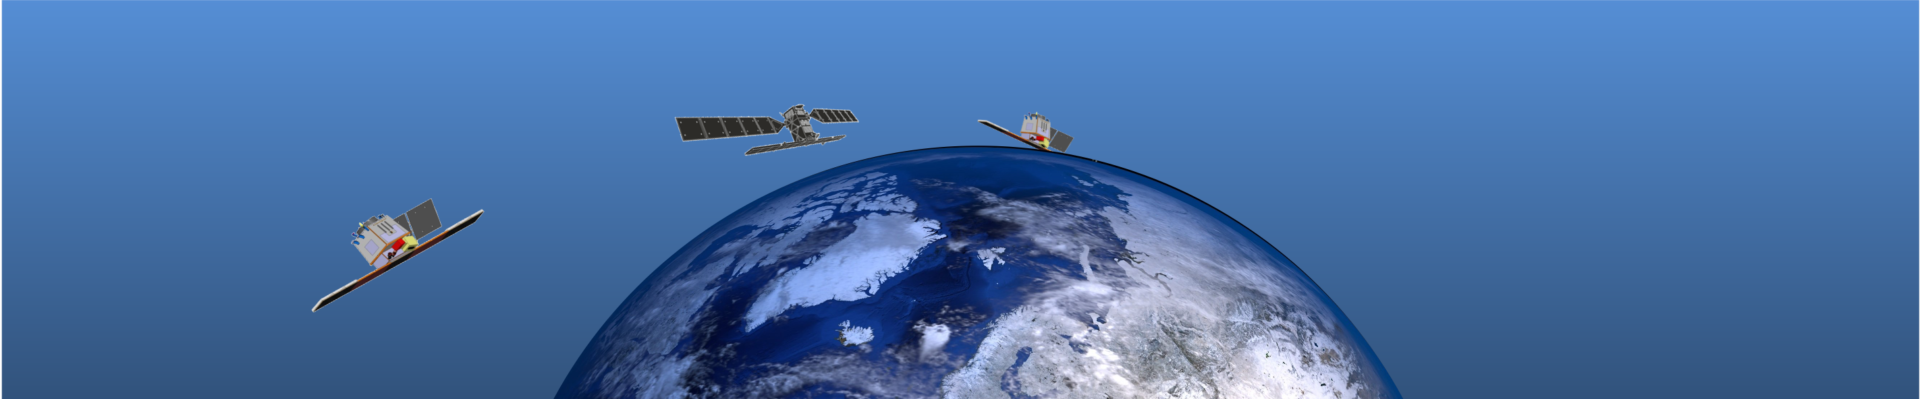 Harmony’s potential for land-ice observations